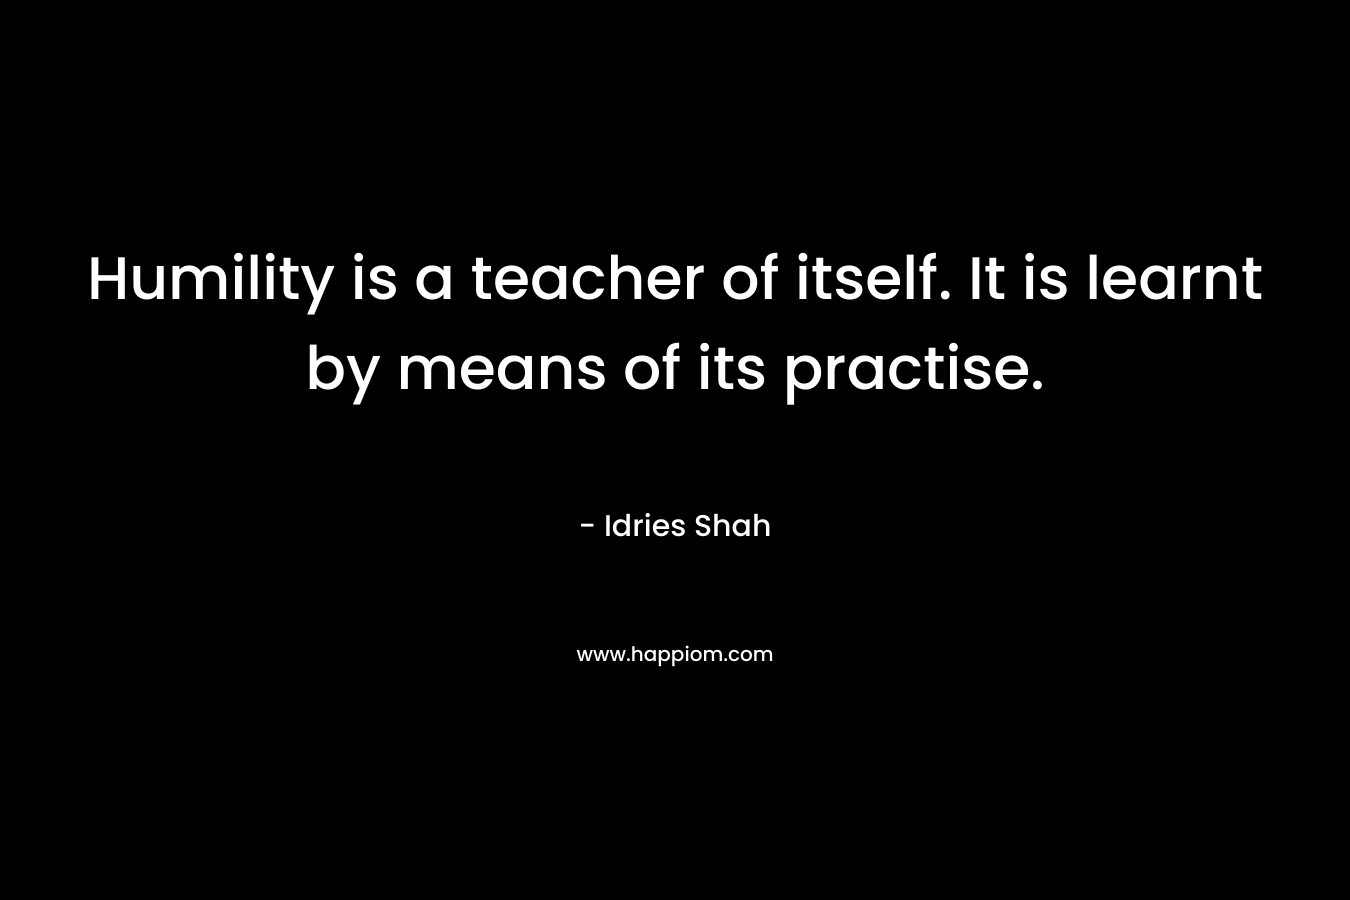 Humility is a teacher of itself. It is learnt by means of its practise. – Idries Shah